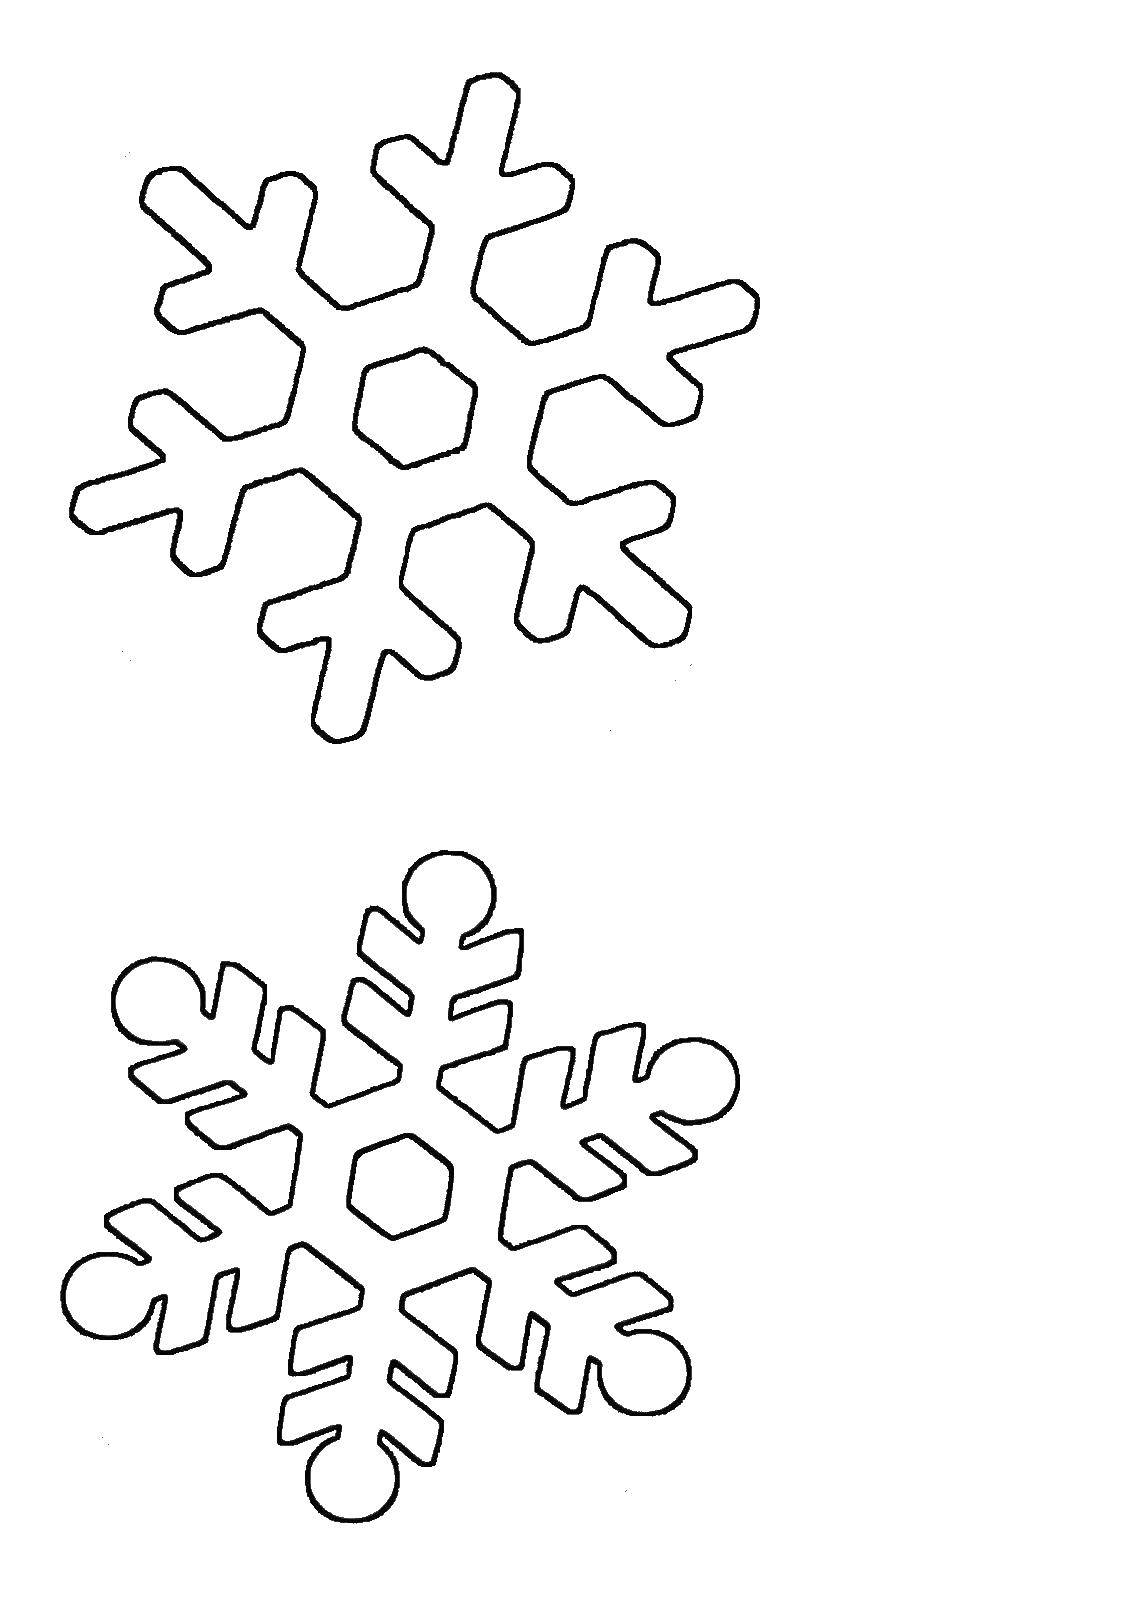 Coloring The types of snowflakes. Category The contour snowflakes. Tags:  snowflake.